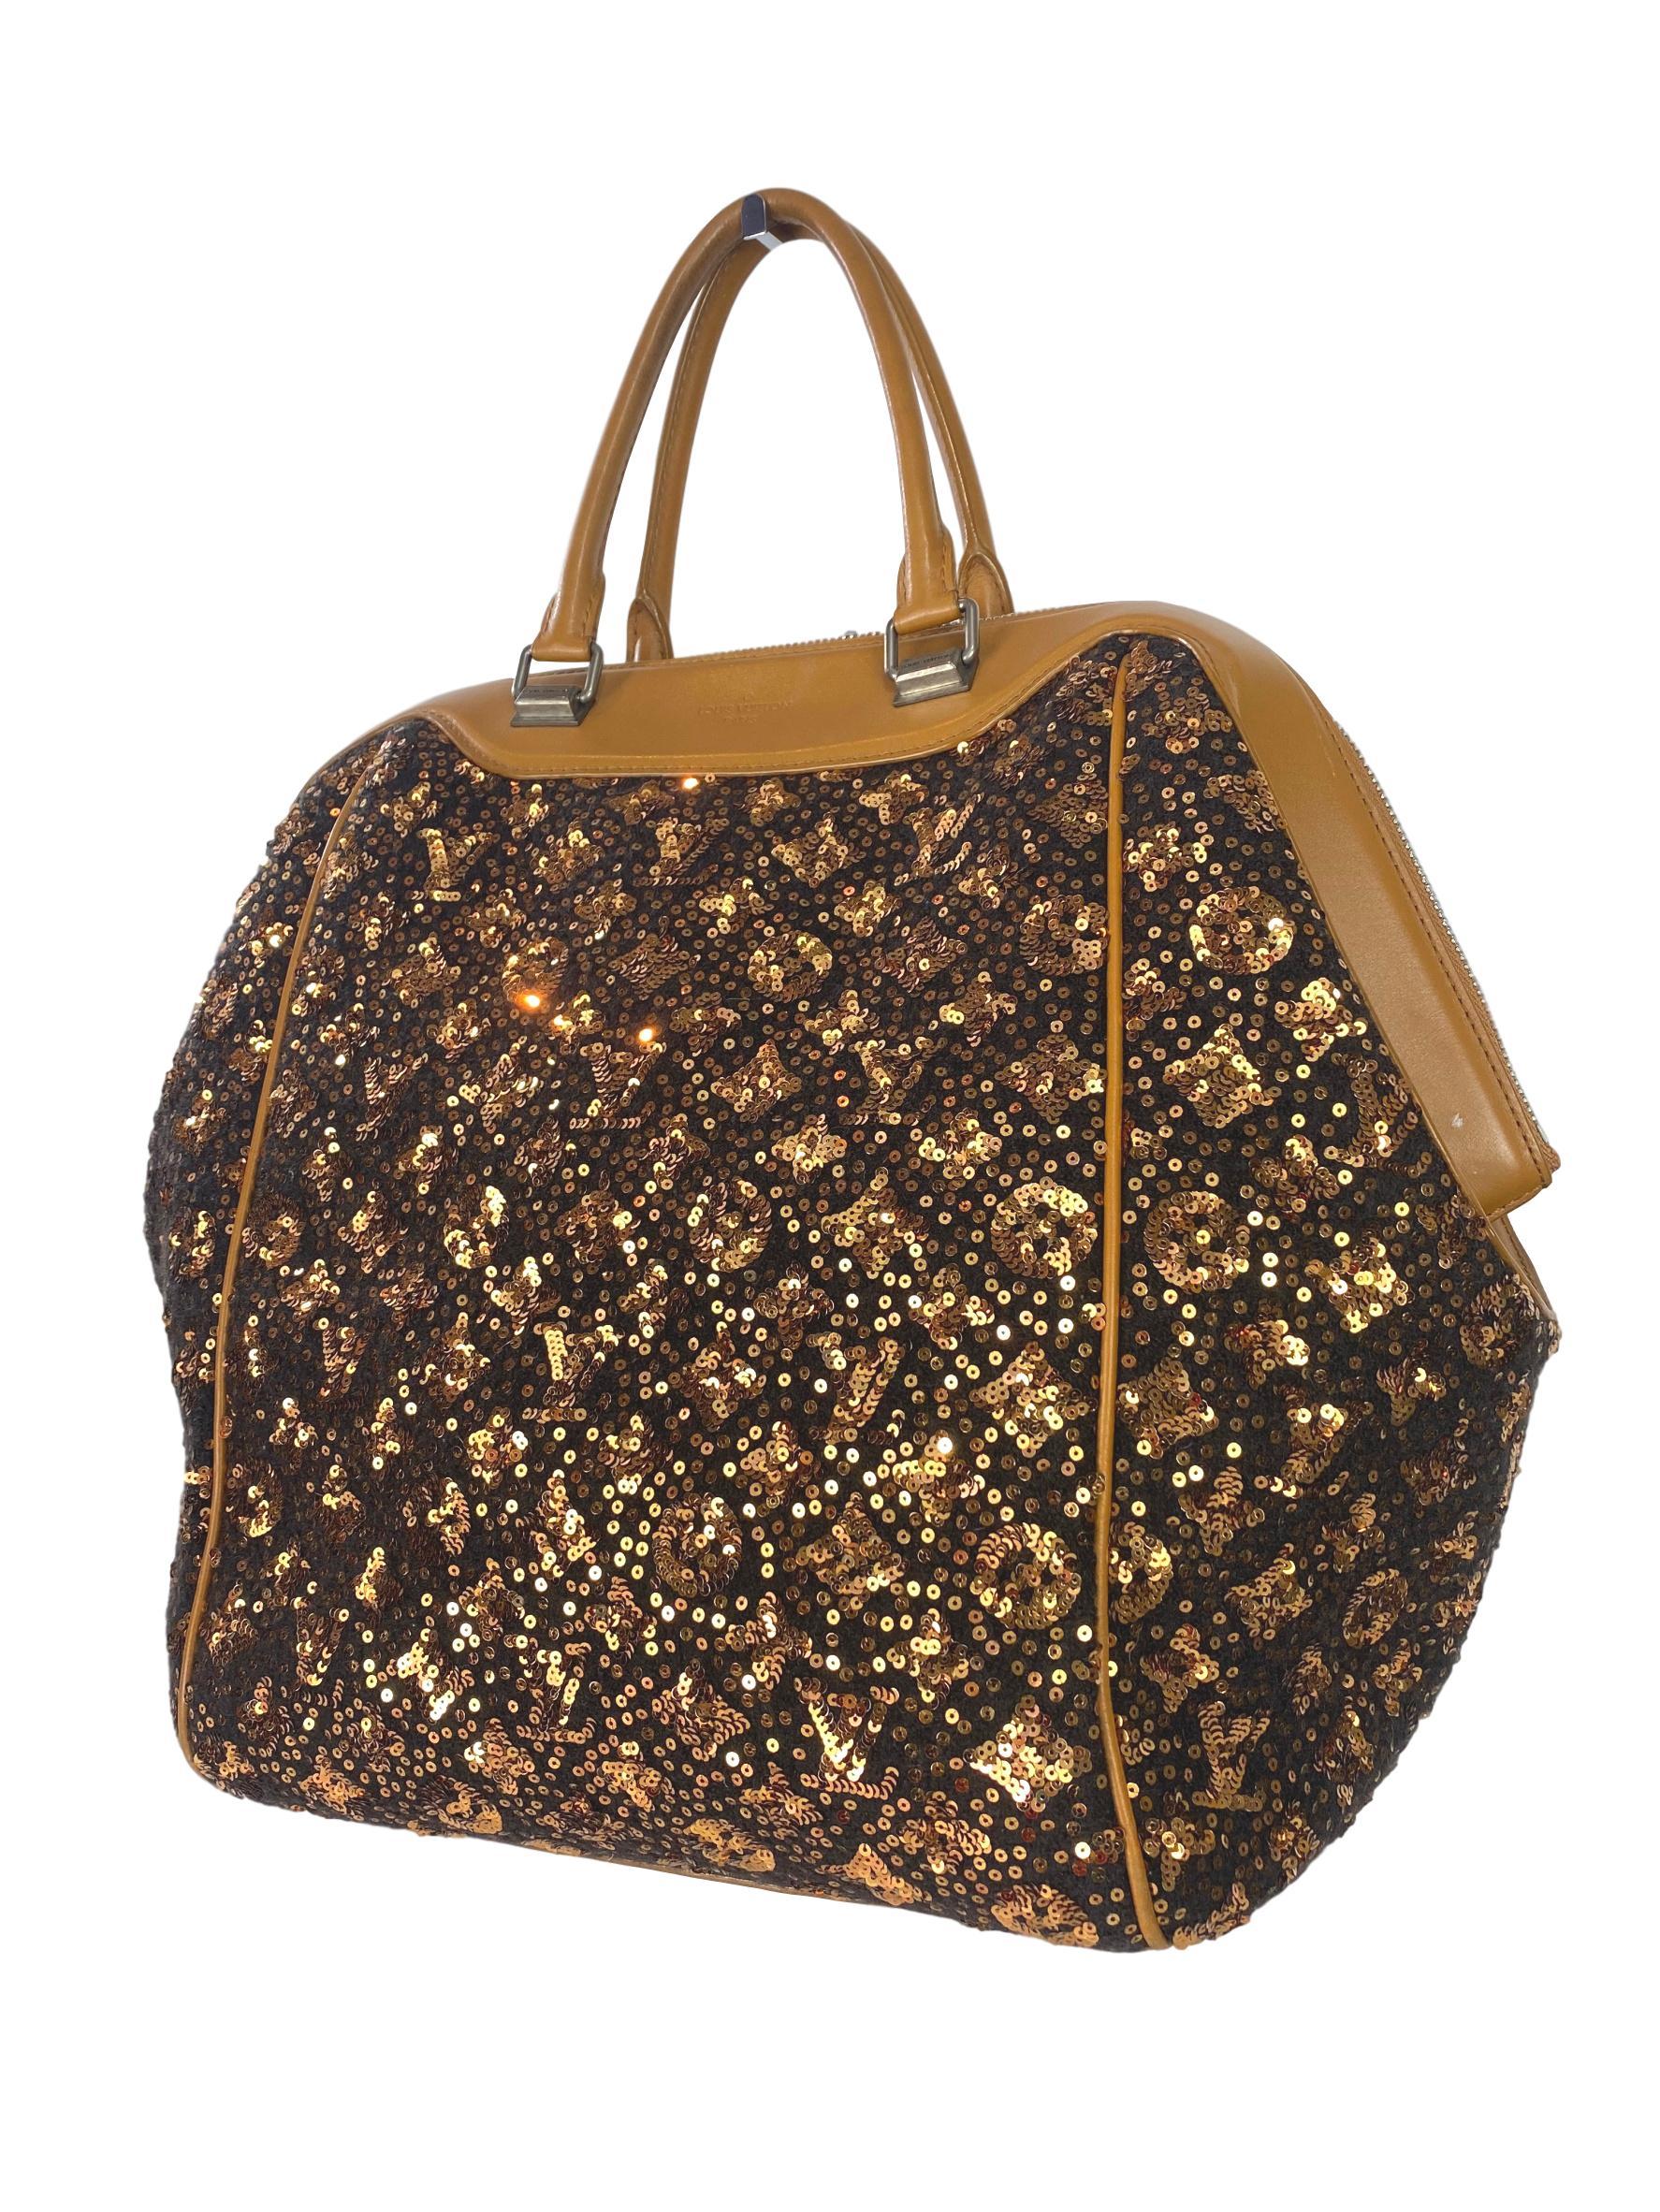 Louis Vuitton North South Sunshine Express Sequin Bag, Limited Edition 2012-2013. The entirety of this Louis Vuitton speedy is covered in a beautiful sequin monogram embellishment with double rolled top vachetta handles and trim in classic tan Louis